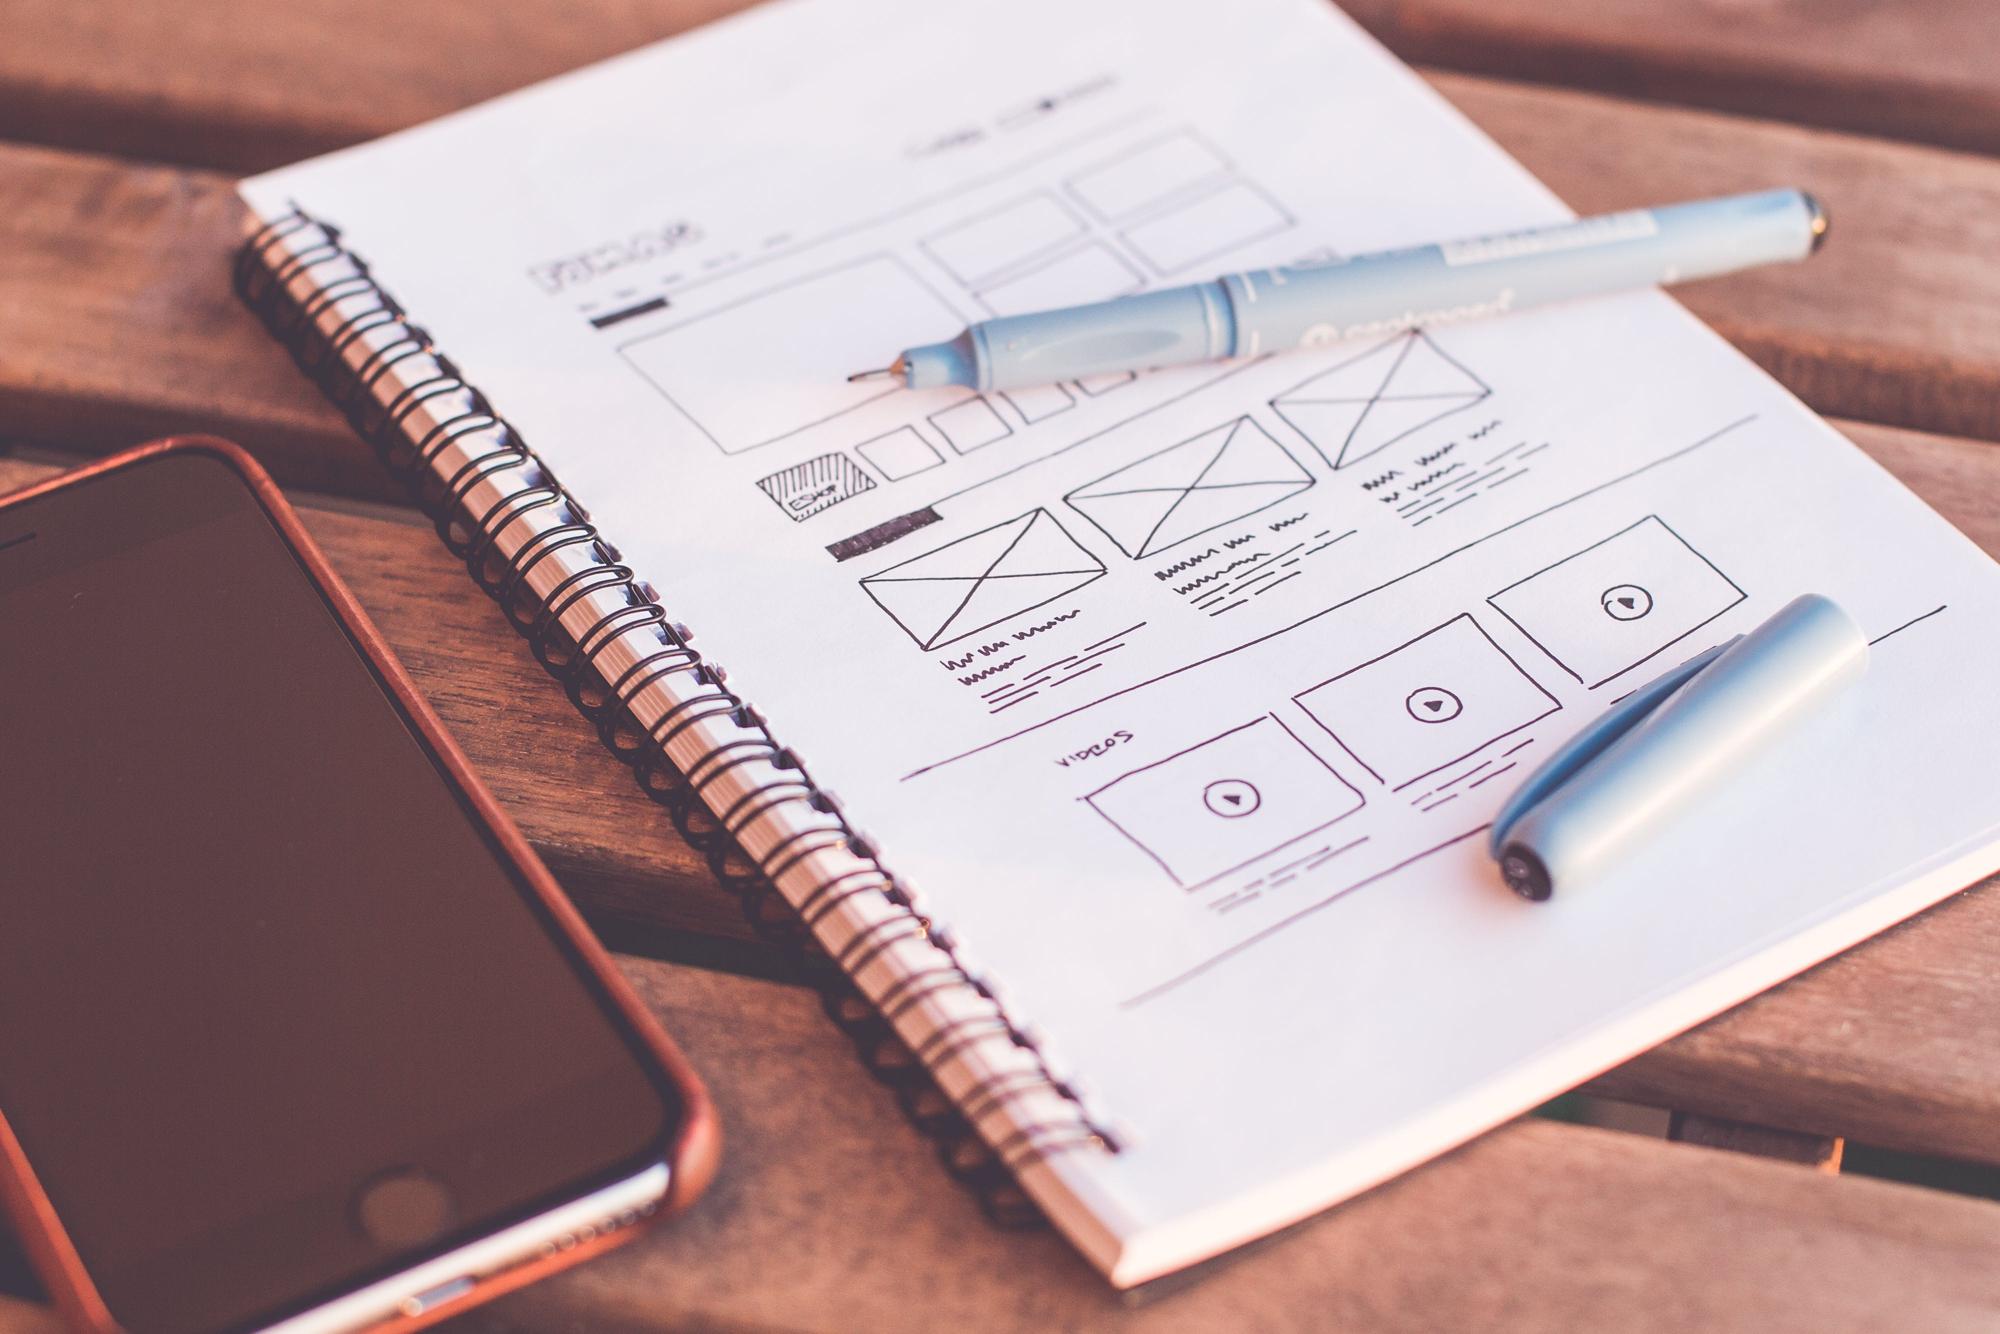 The fundamentals of wireframing in ux design